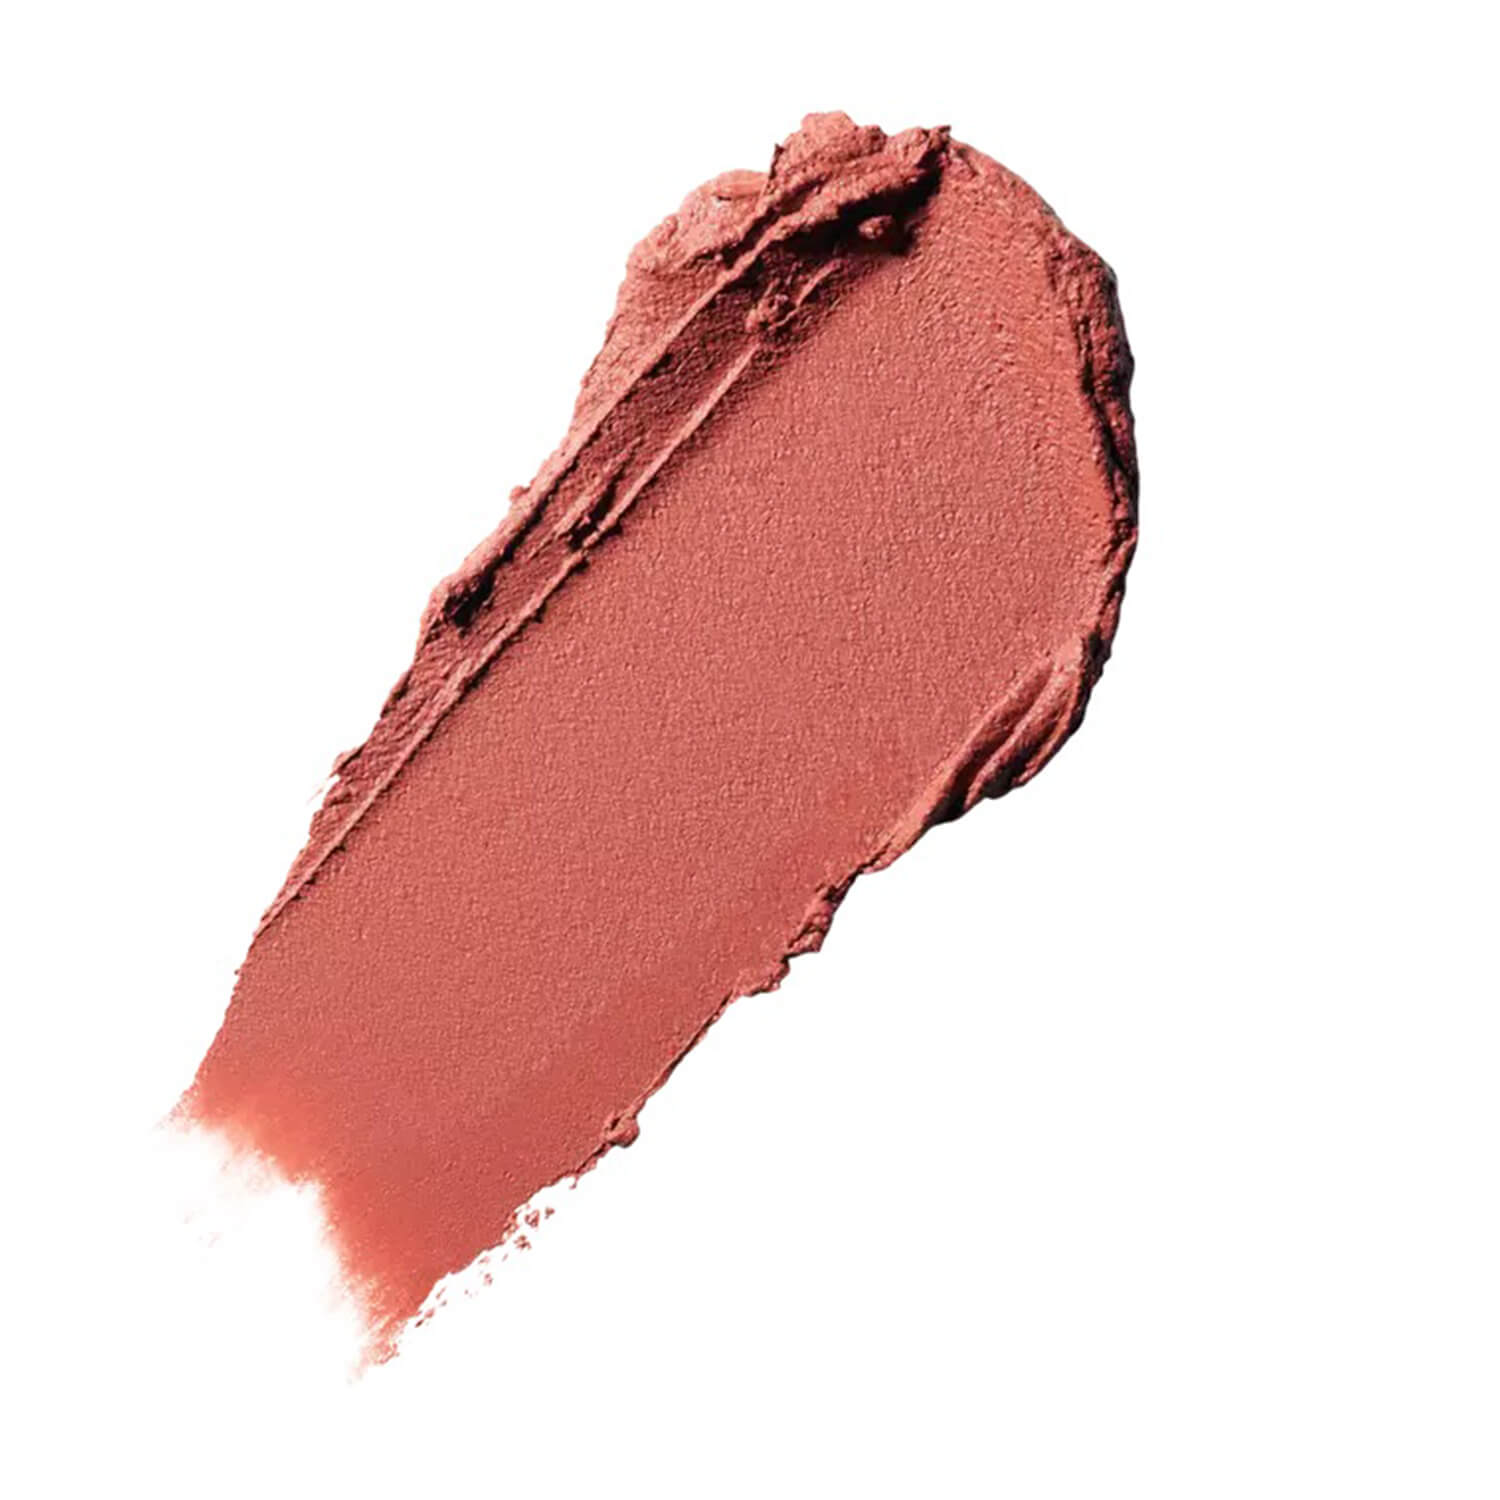 swatch image of mac mull it over lipstick available at Heygirl.pk for delivery in Pakistan